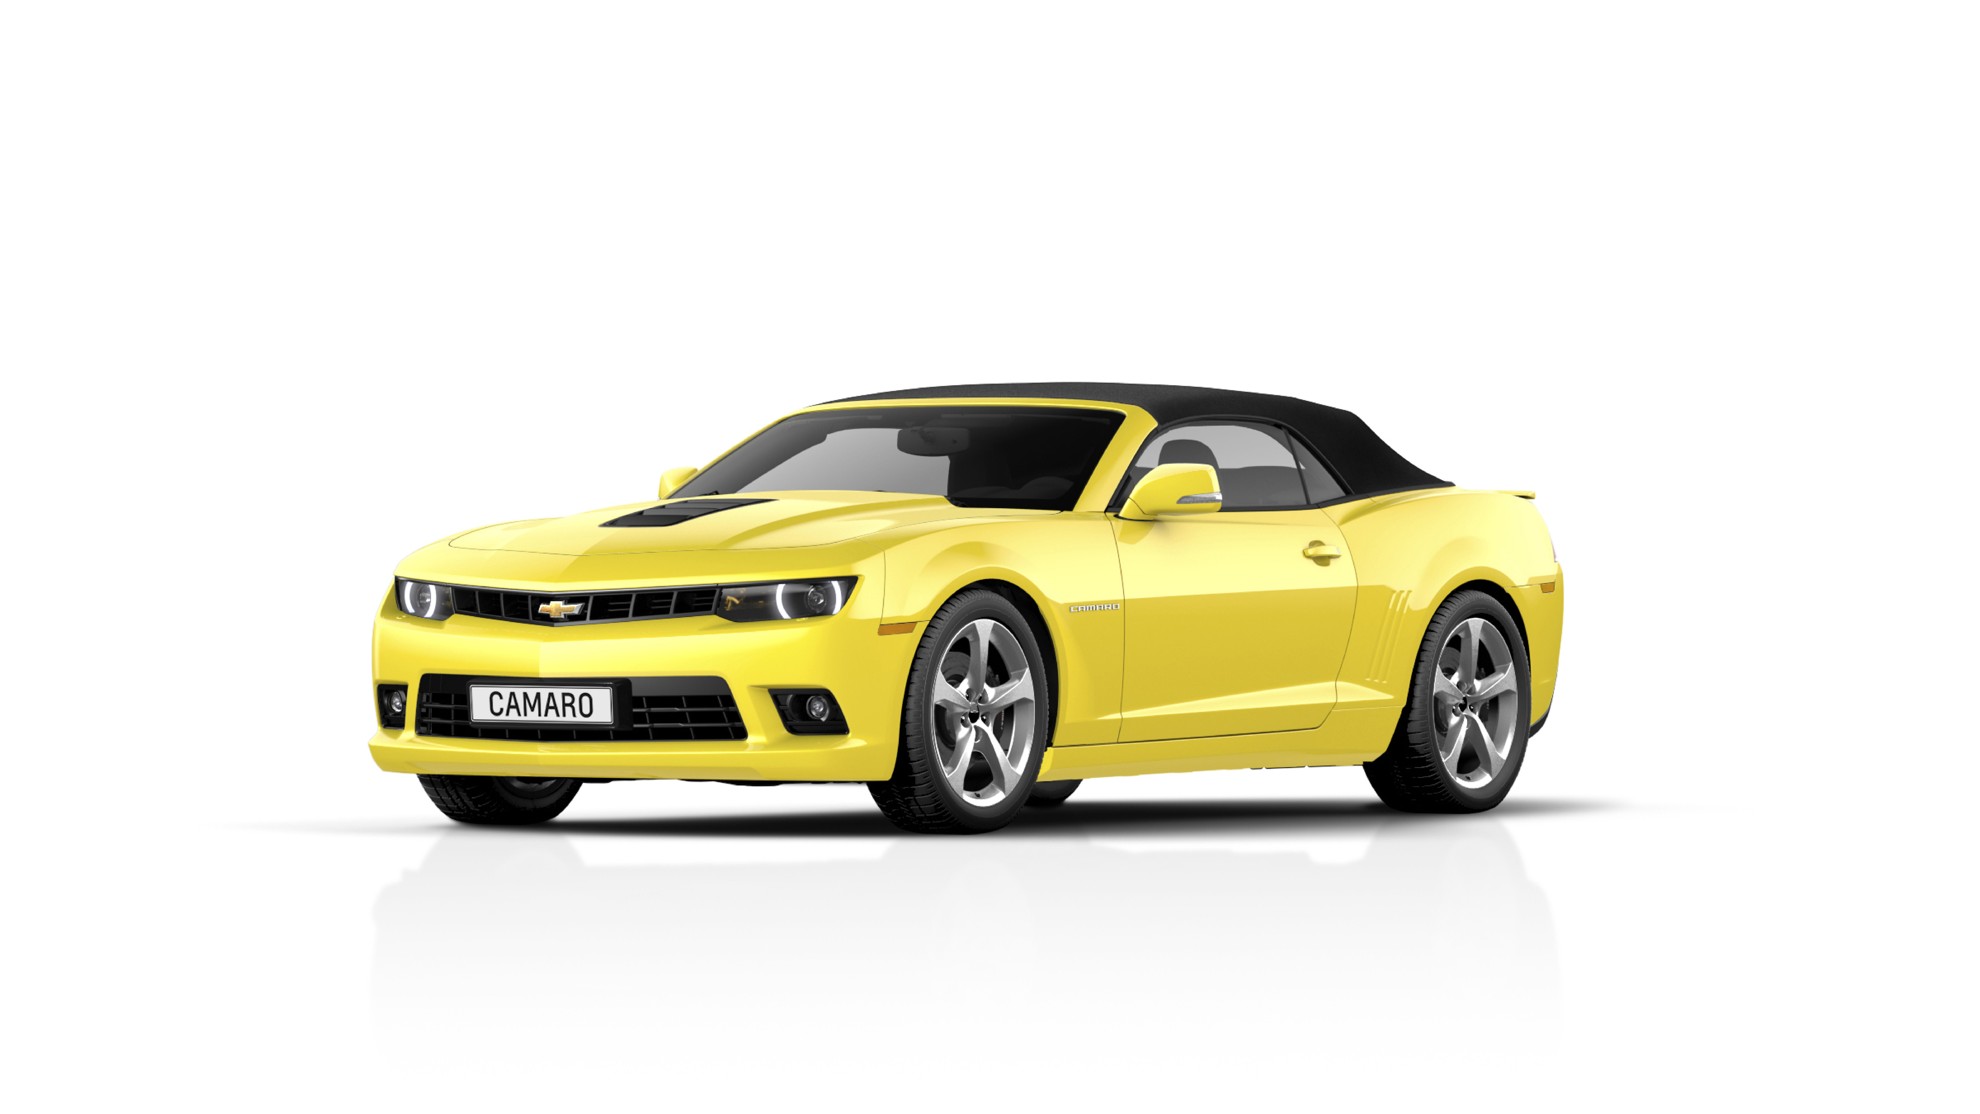 Chevrolet’s new Camaro makes first appearance in Europe